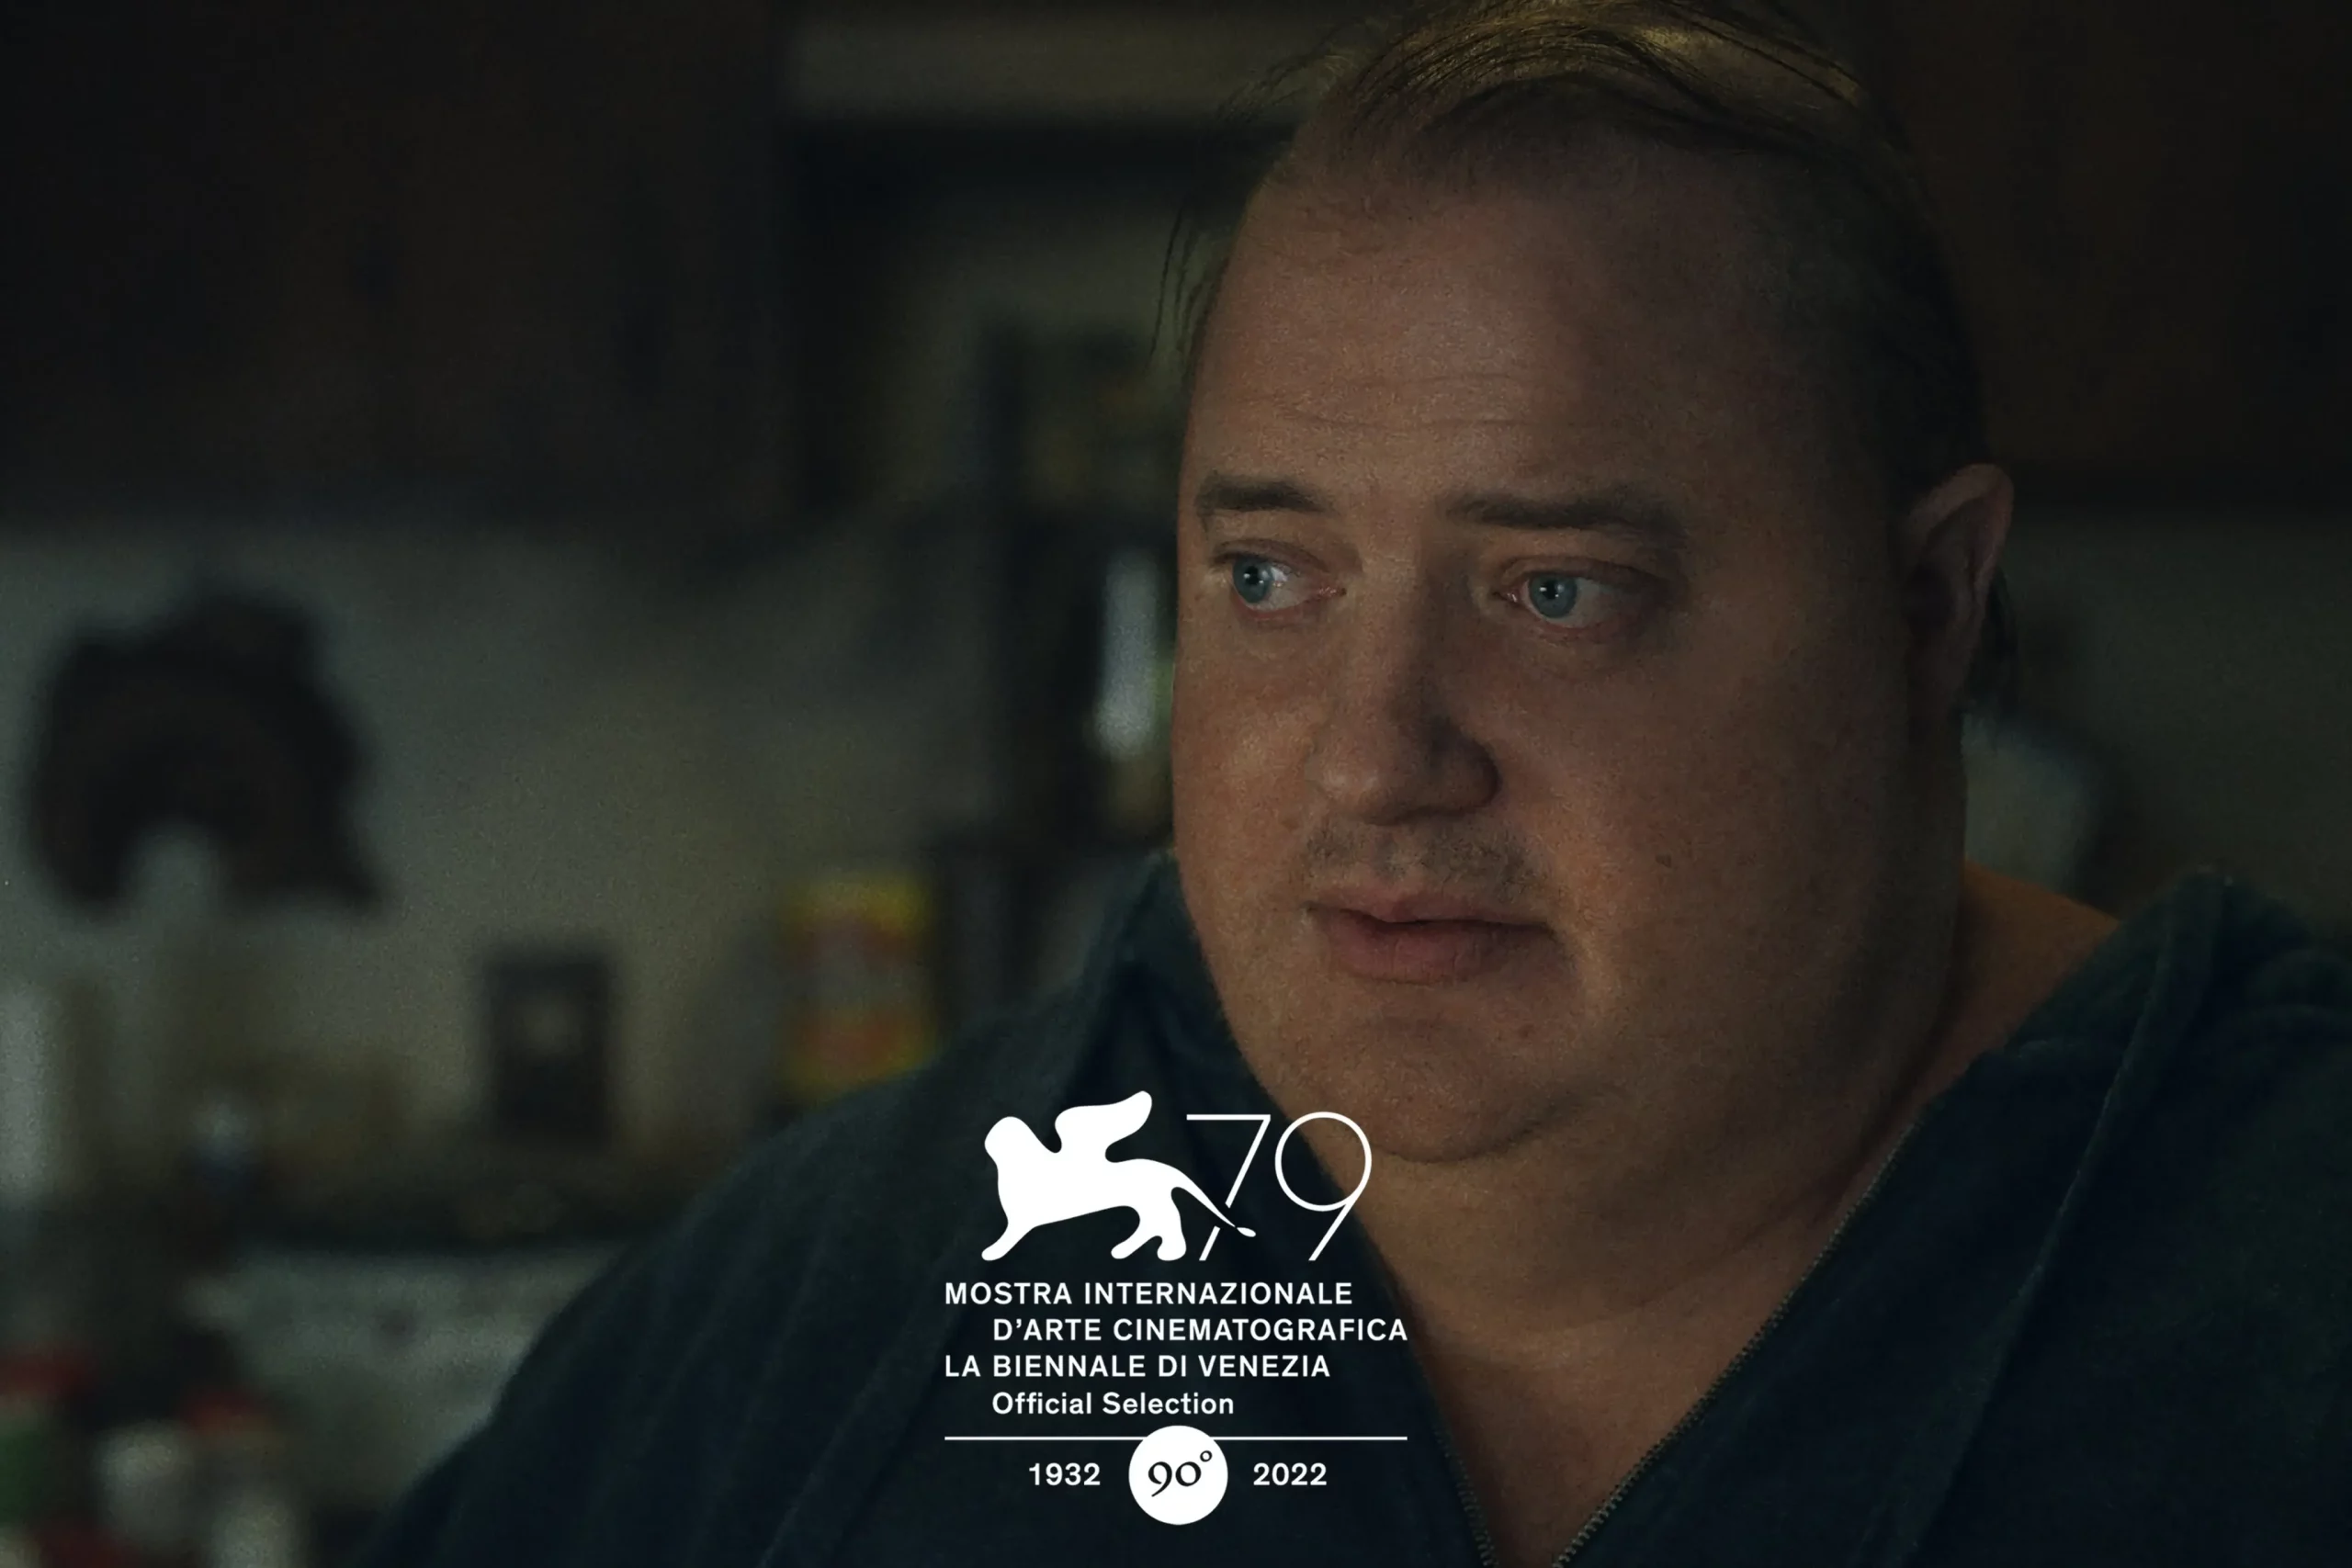 Brendan Fraser's 'The Whale‎' premieres at 79th Venice International Film Festival to rave reviews | FMV6